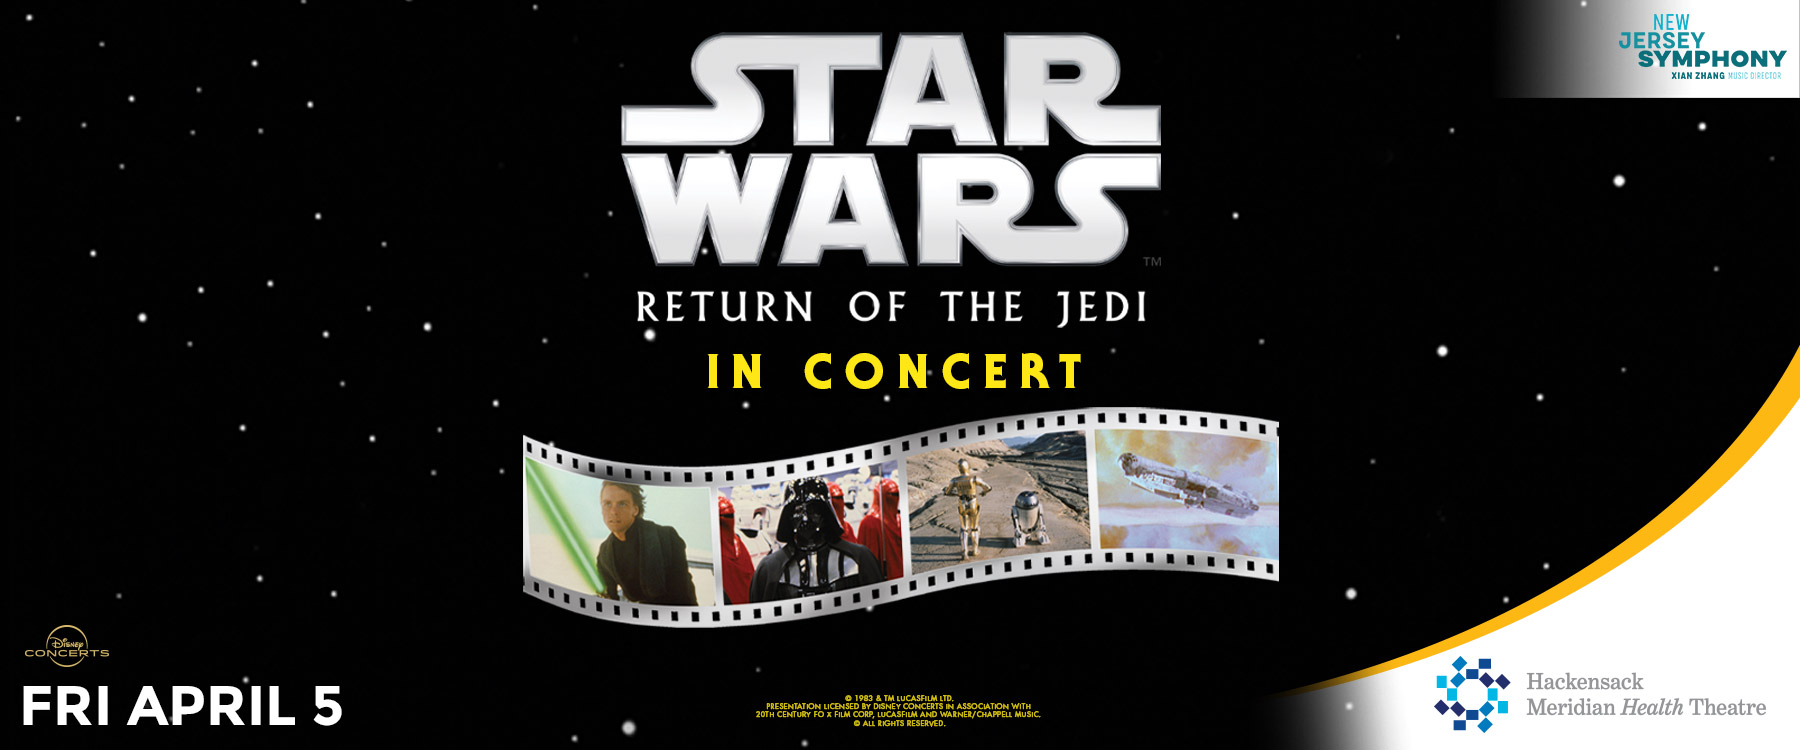 New Jersey Symphony: Return Of The Jedi Scored Live In Concert